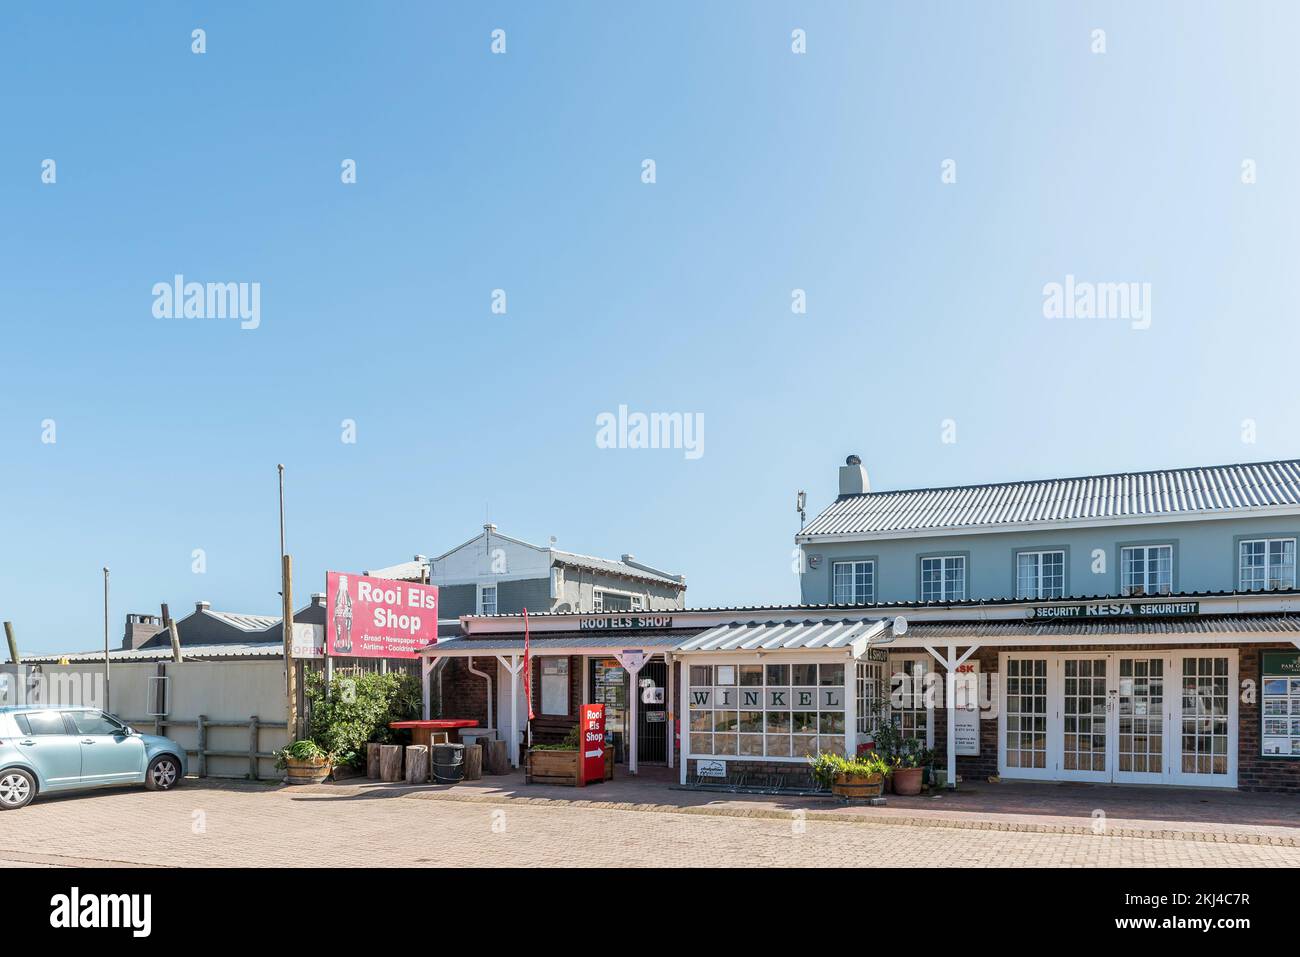 Rooiels, South Africa - Sep 20, 2022: A street scene in Rooiels in the Western Cape Overberg Region. A supermarket, security business and a vehicle ar Stock Photo